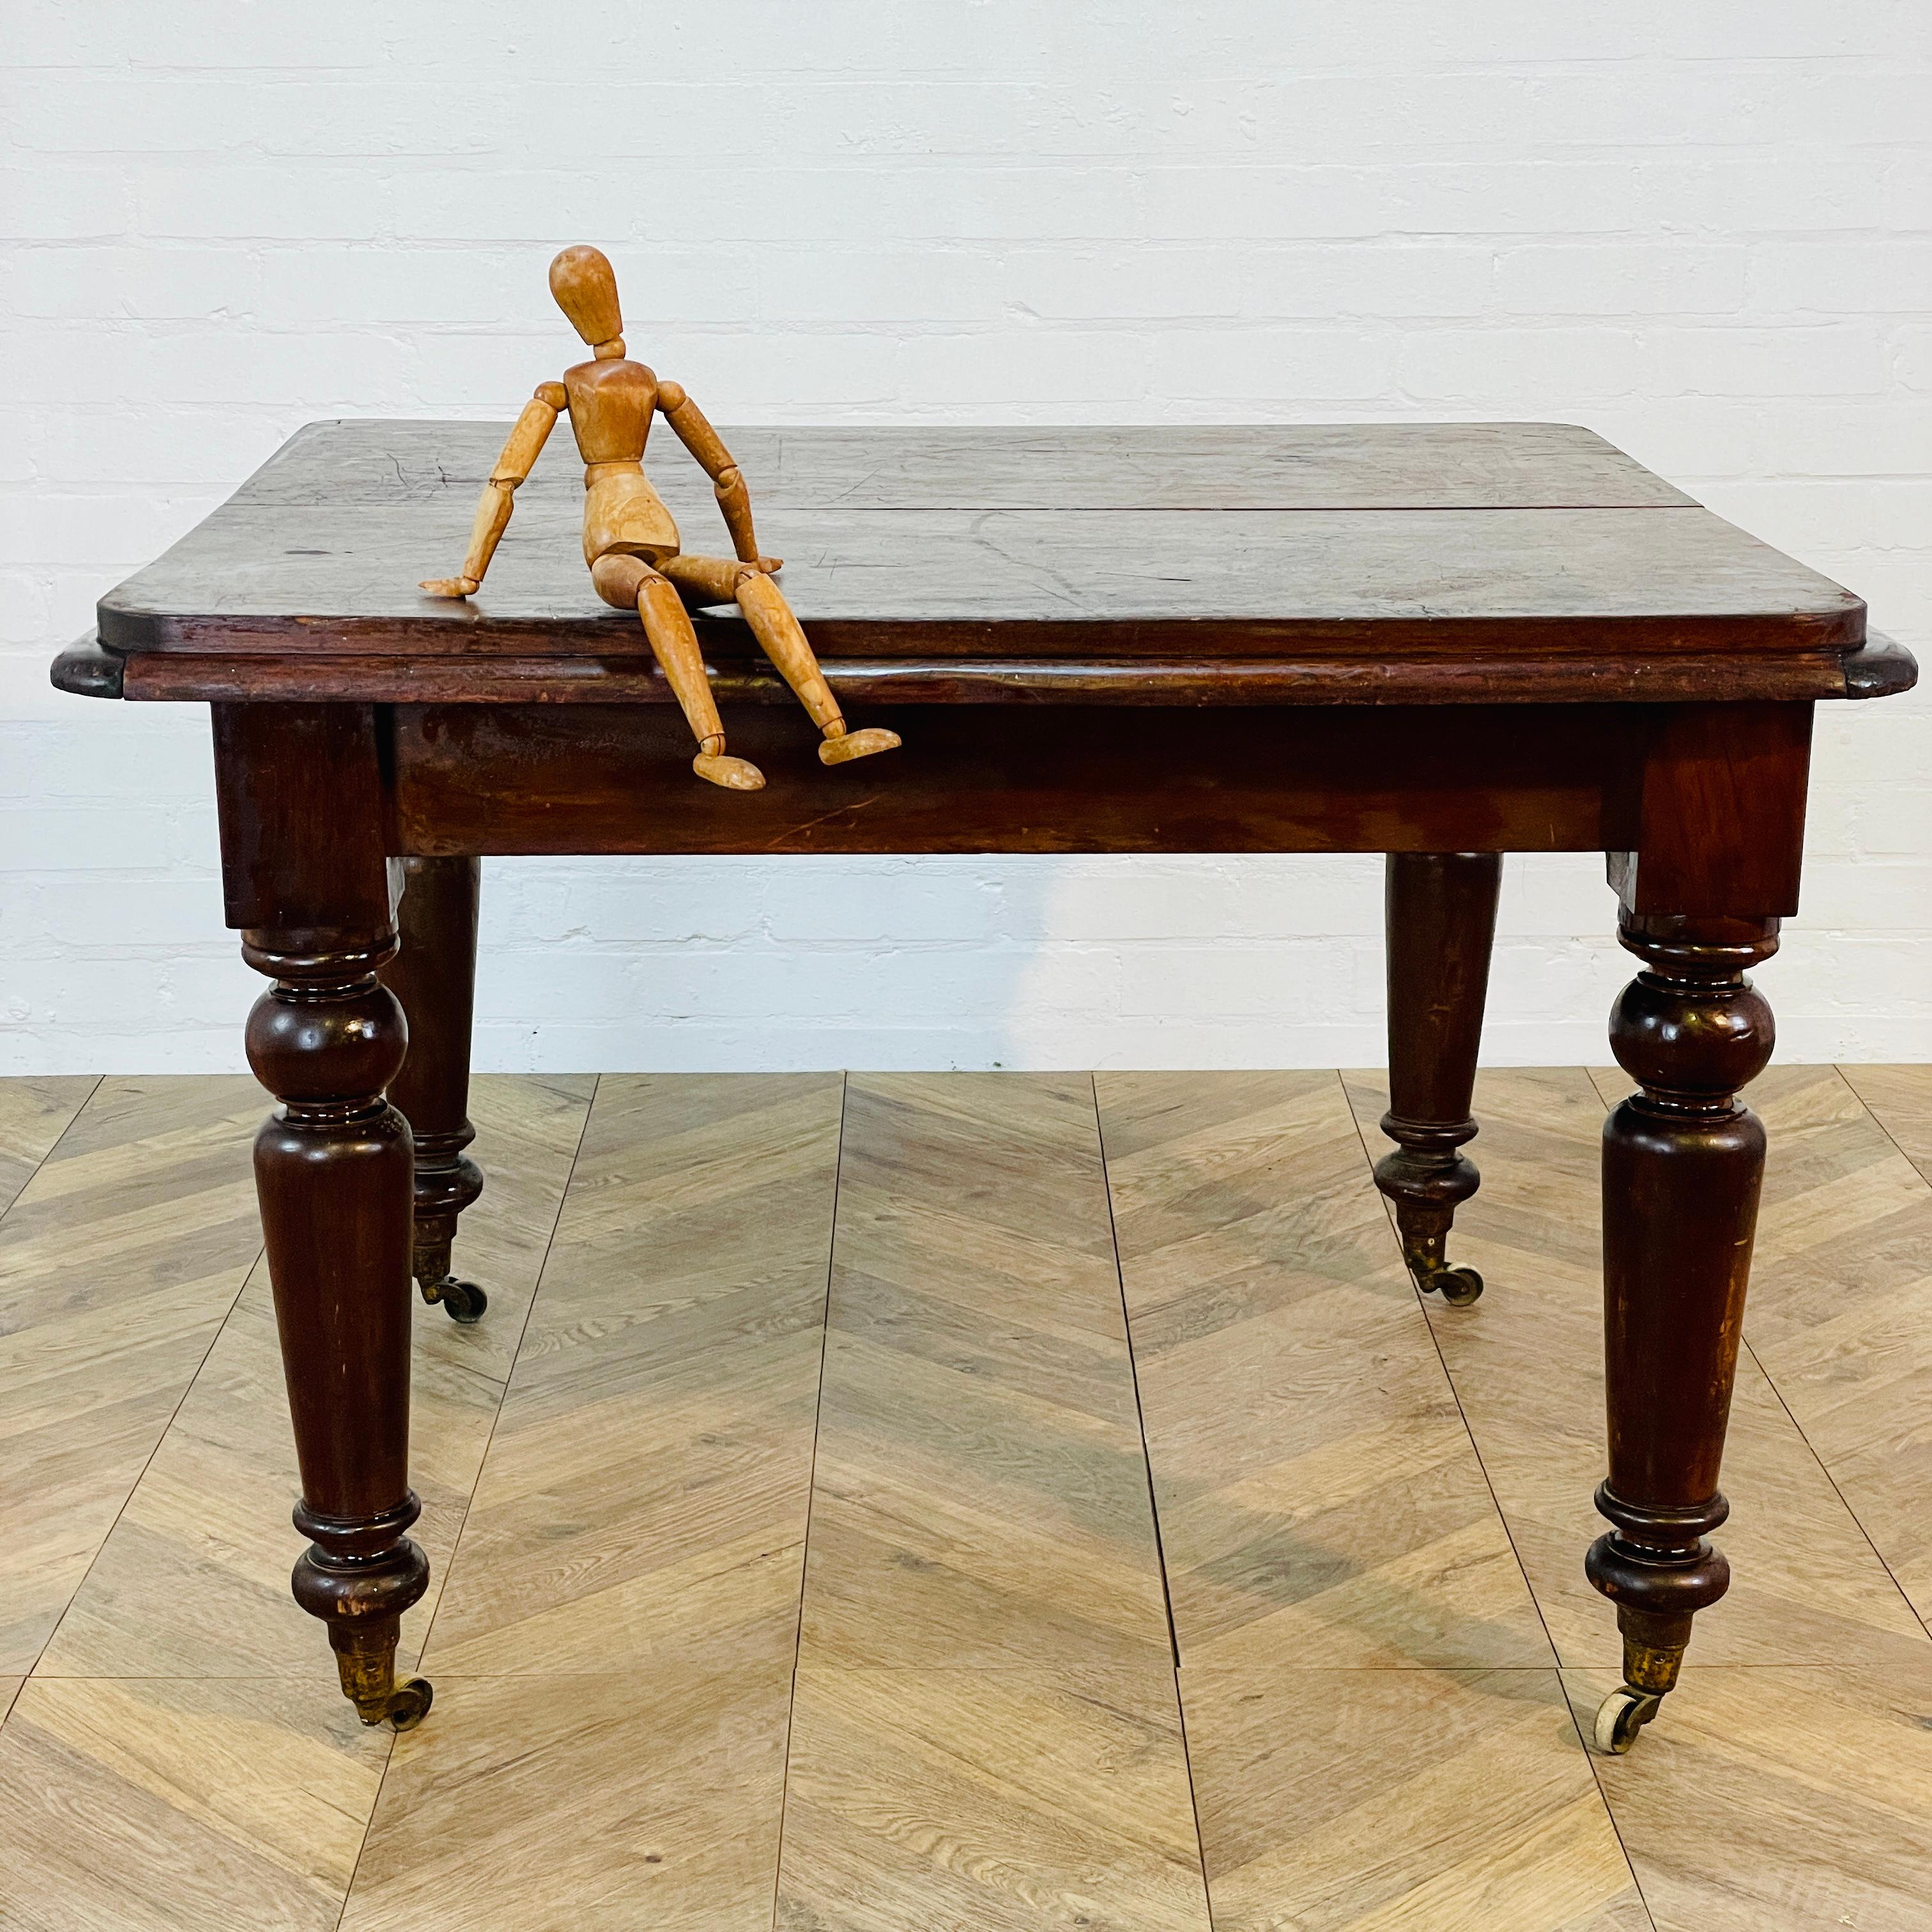 A Real Frankenstein’s Monster of a Dining Table!

Circa Late 19th Century, English Mahogany Dining Table on Original Brass Castors.

At some point the table has been cut down to not extend and fixed.

The table boasts a beautiful warm patina, with